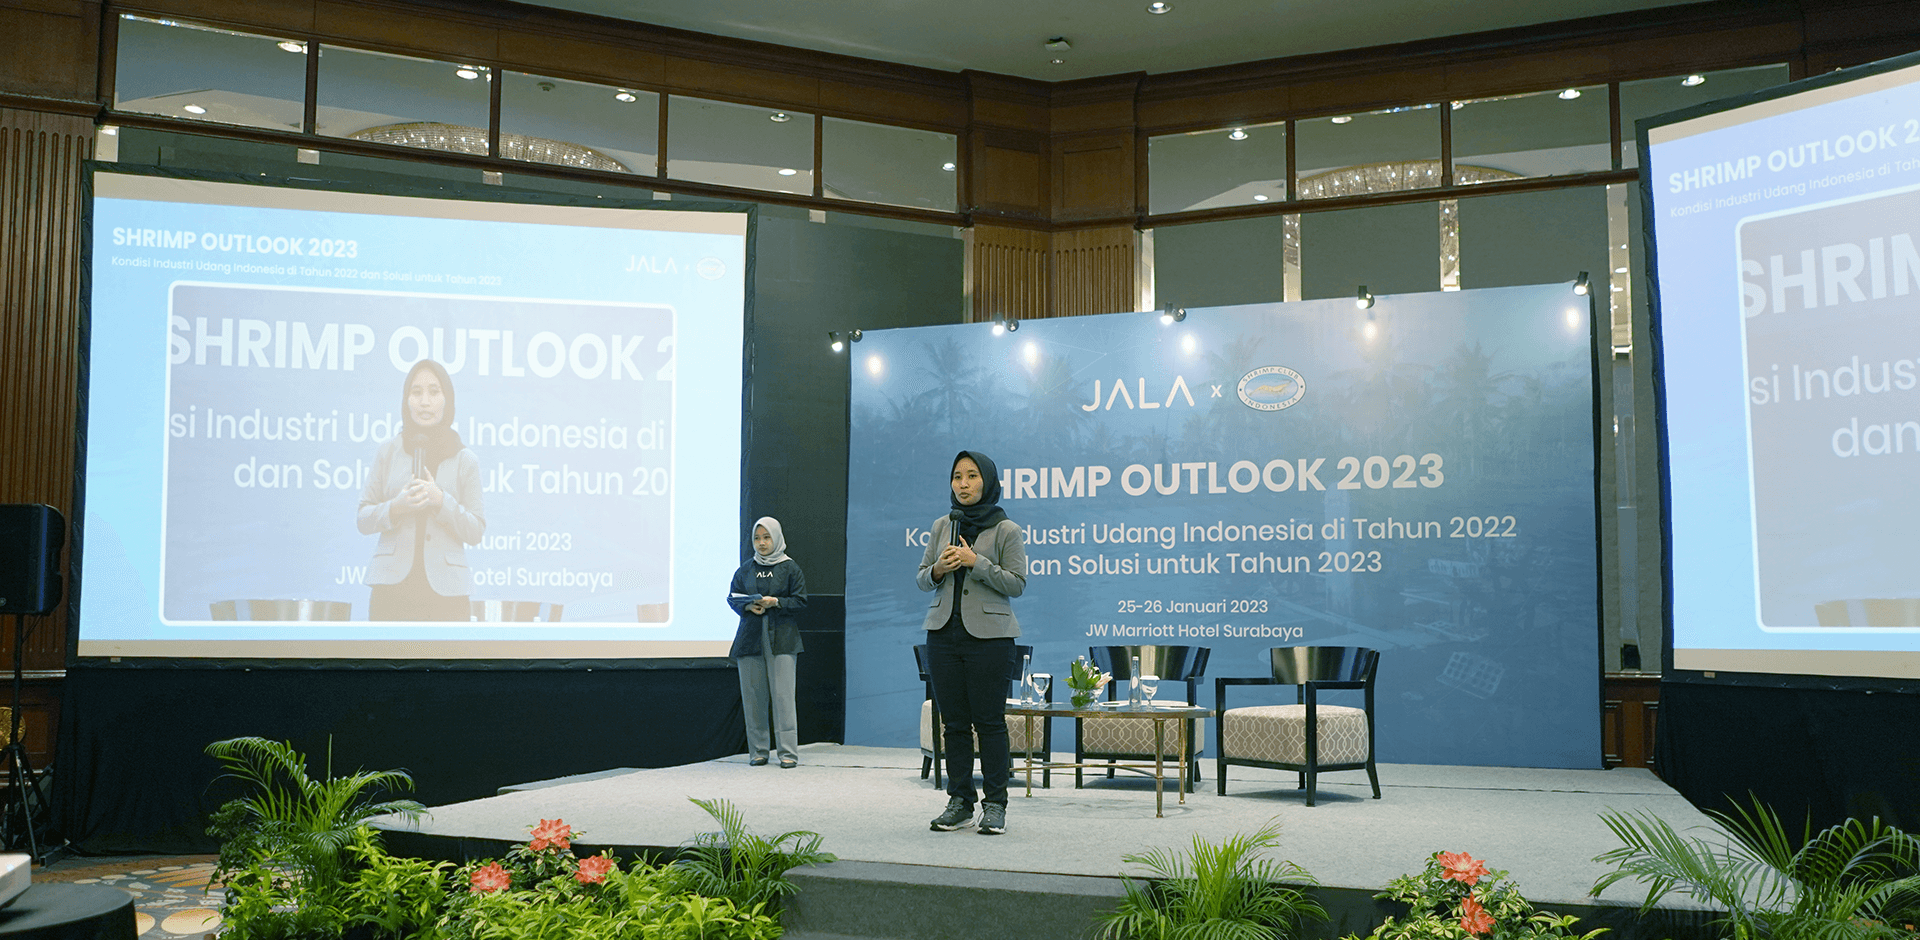 Highlighting Shrimp Farming Condition in Indonesia, JALA Successfully Held Shrimp Outlook 2023